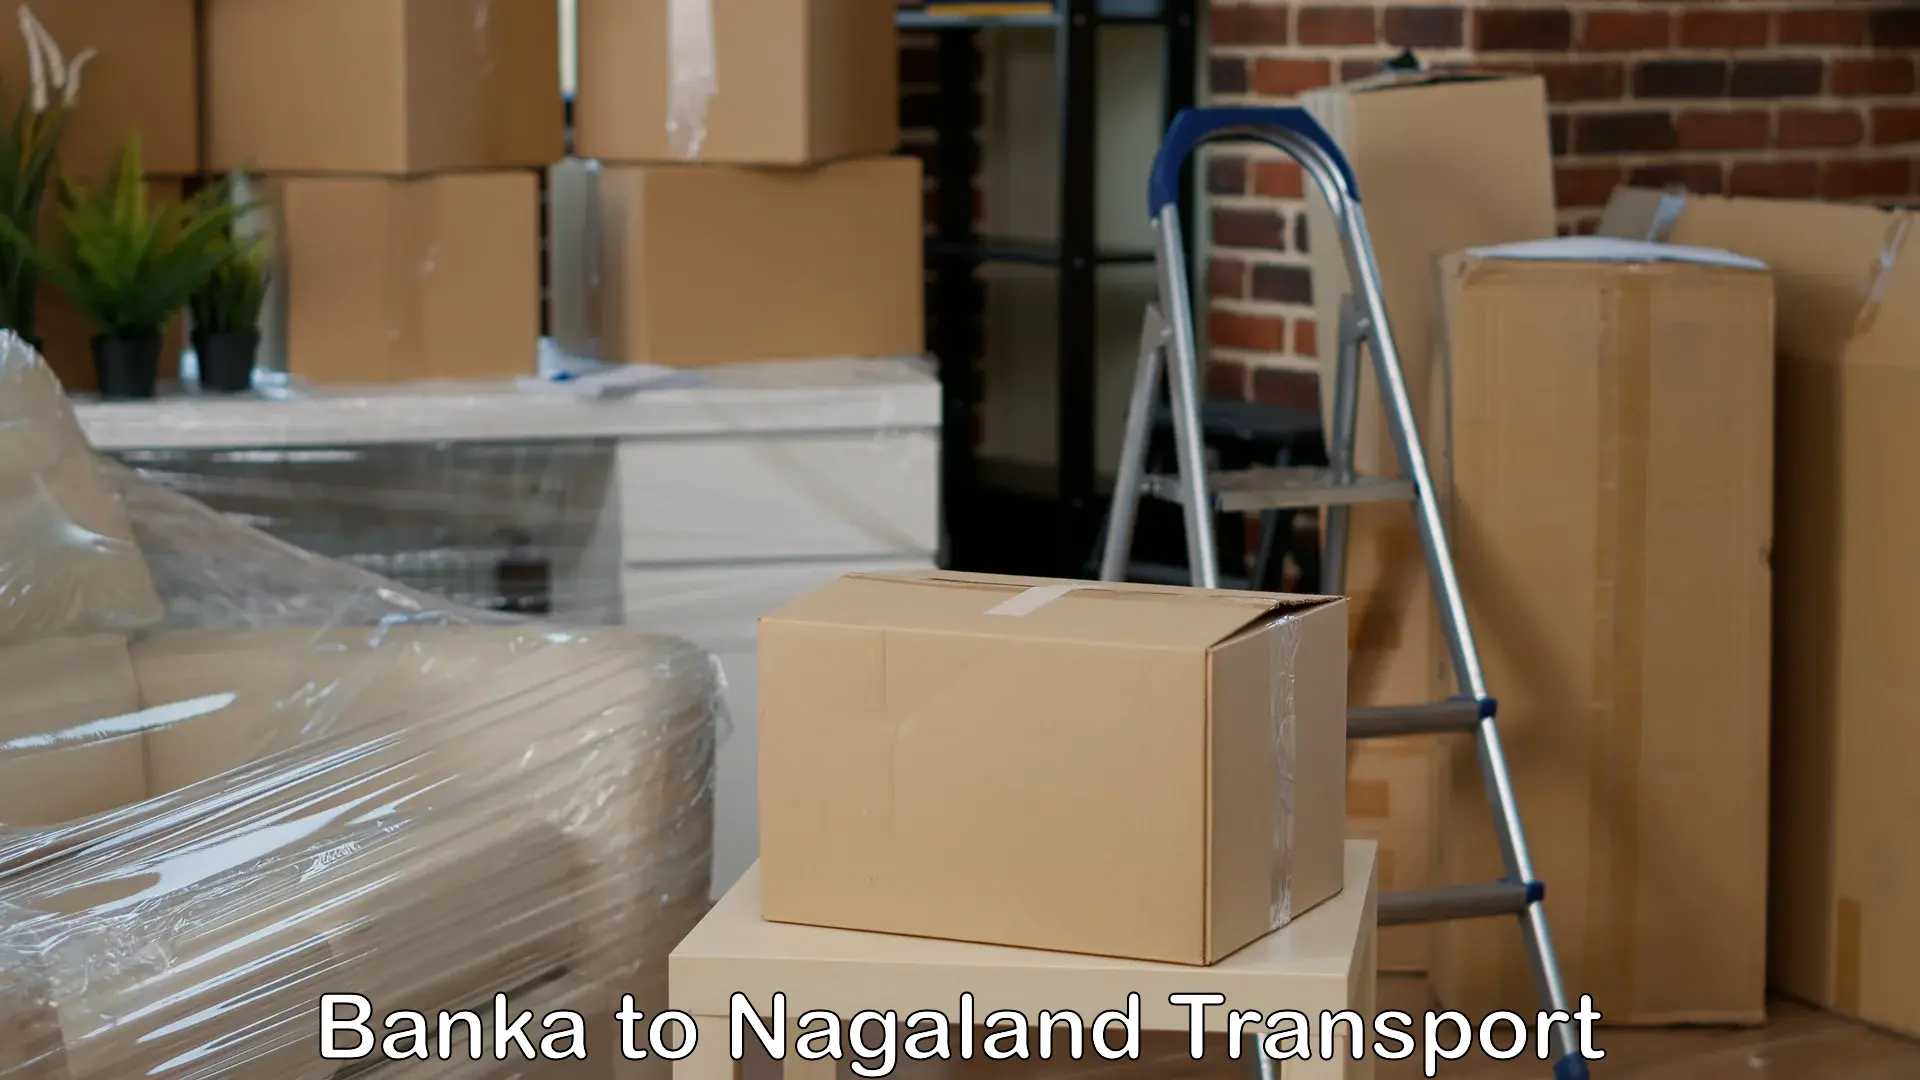 Goods delivery service Banka to Nagaland